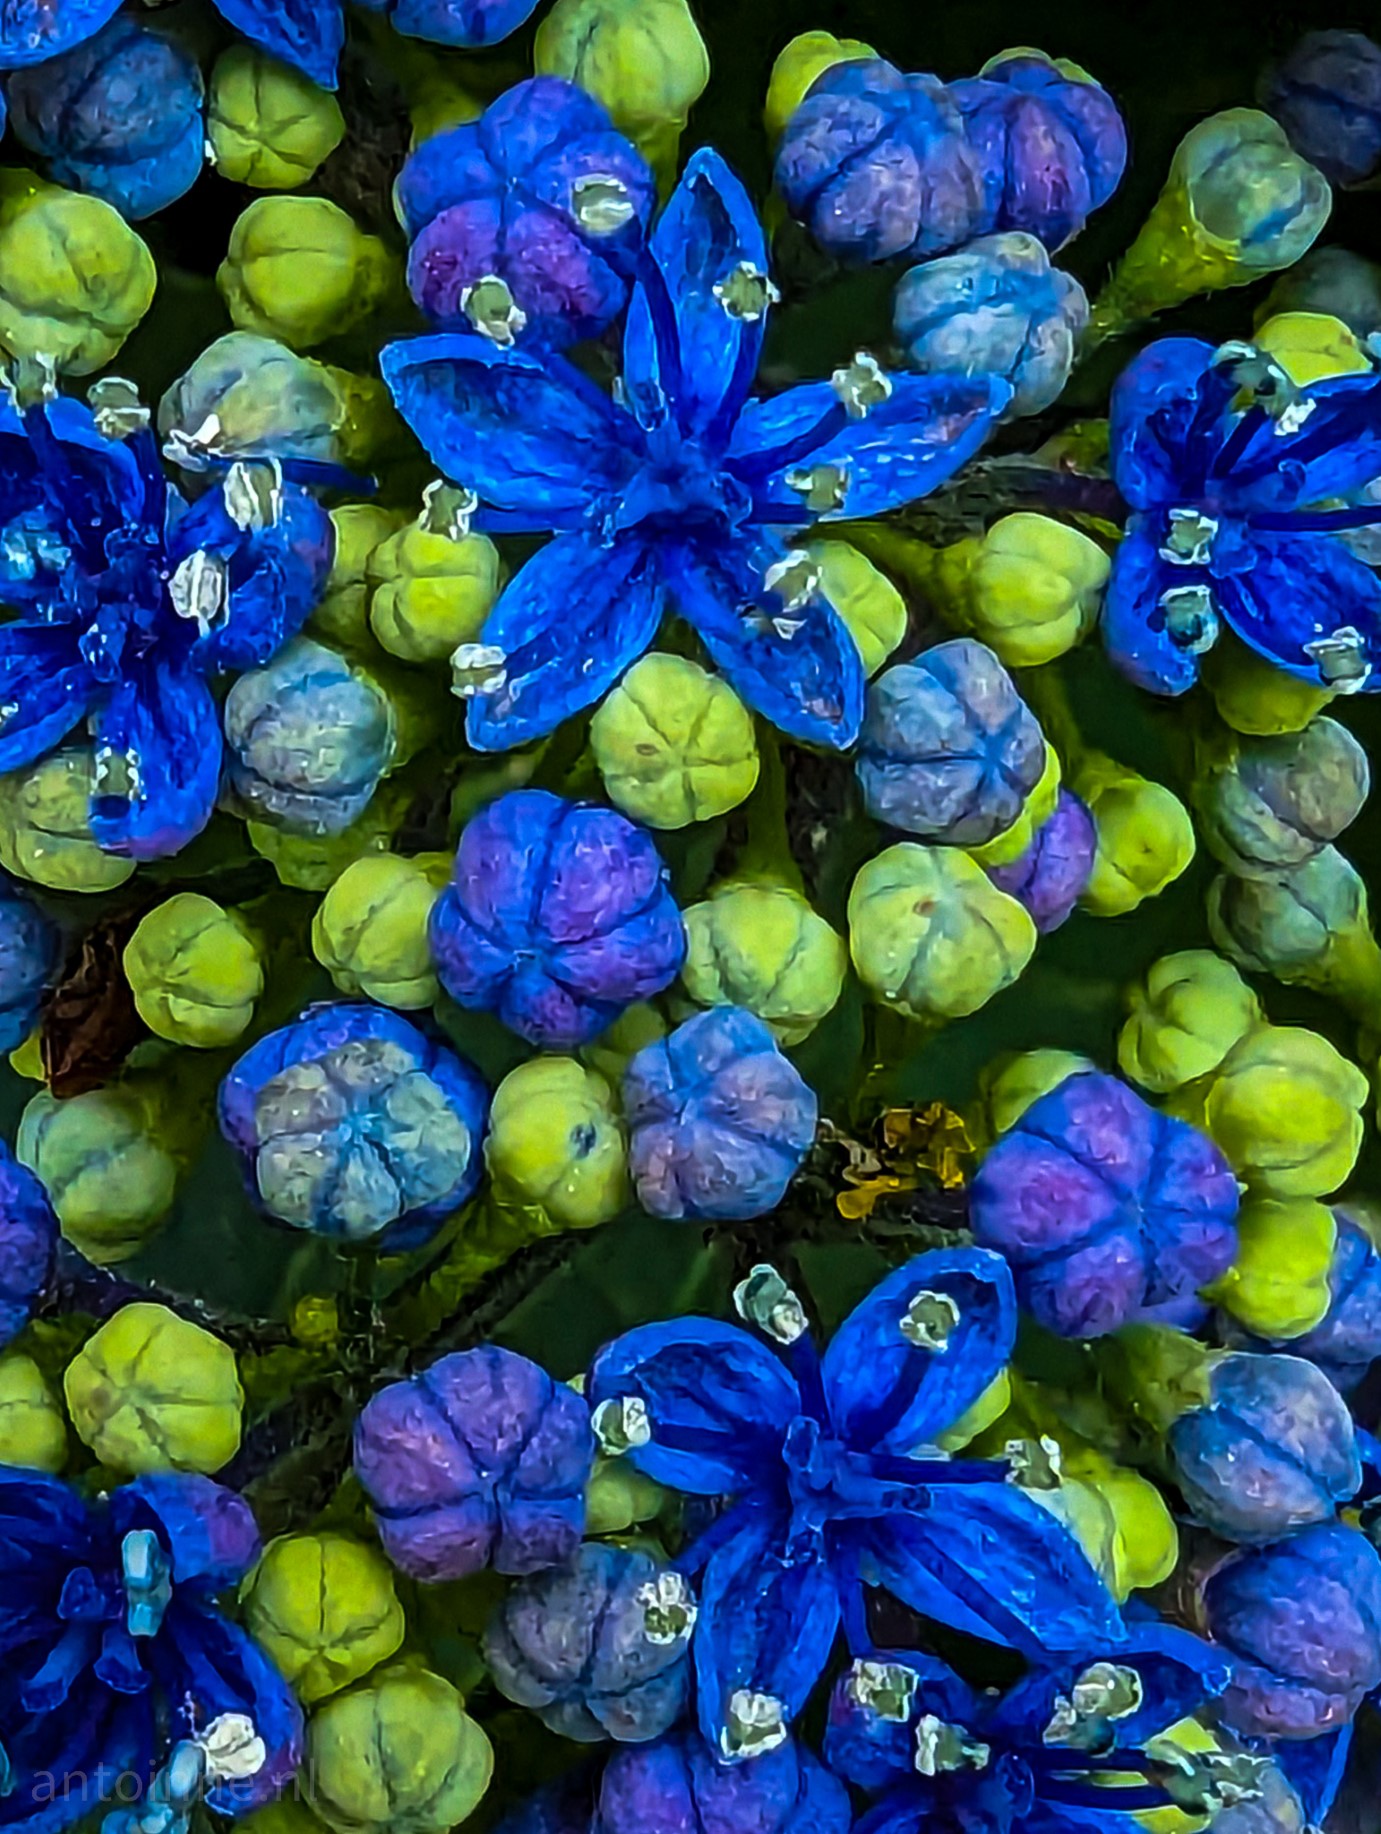 Detail picture of blue flowers among green buds.